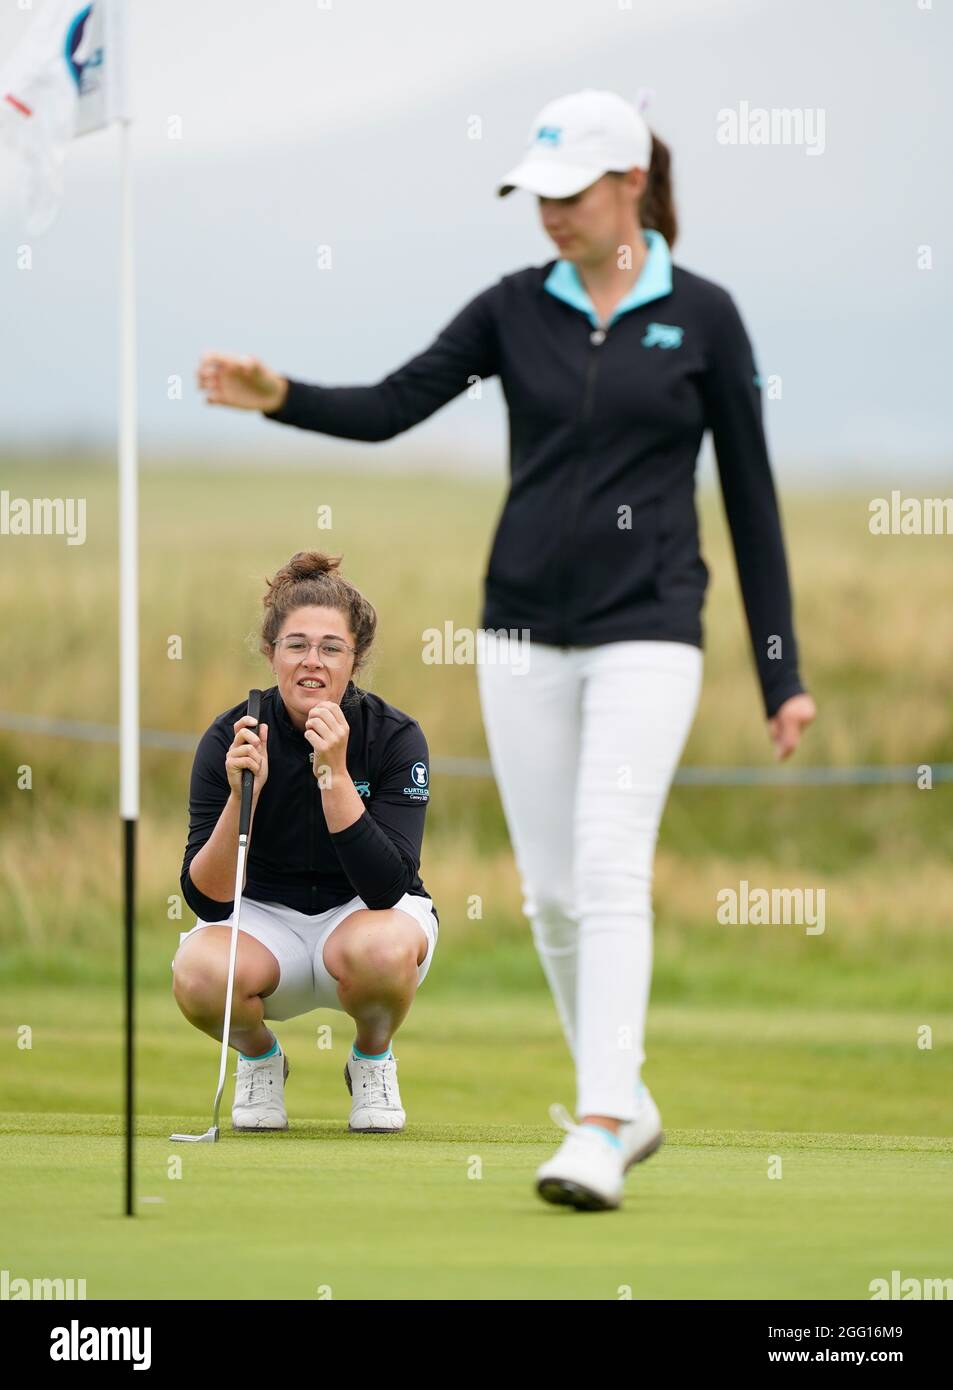 Team GB&I's Emily Toy lines up a putt on the first green during the 2021 Curtis Cup Day 1 - Morning Foursomes at Conwy Golf Club, Conwy, Wales on 26/8 Stock Photo